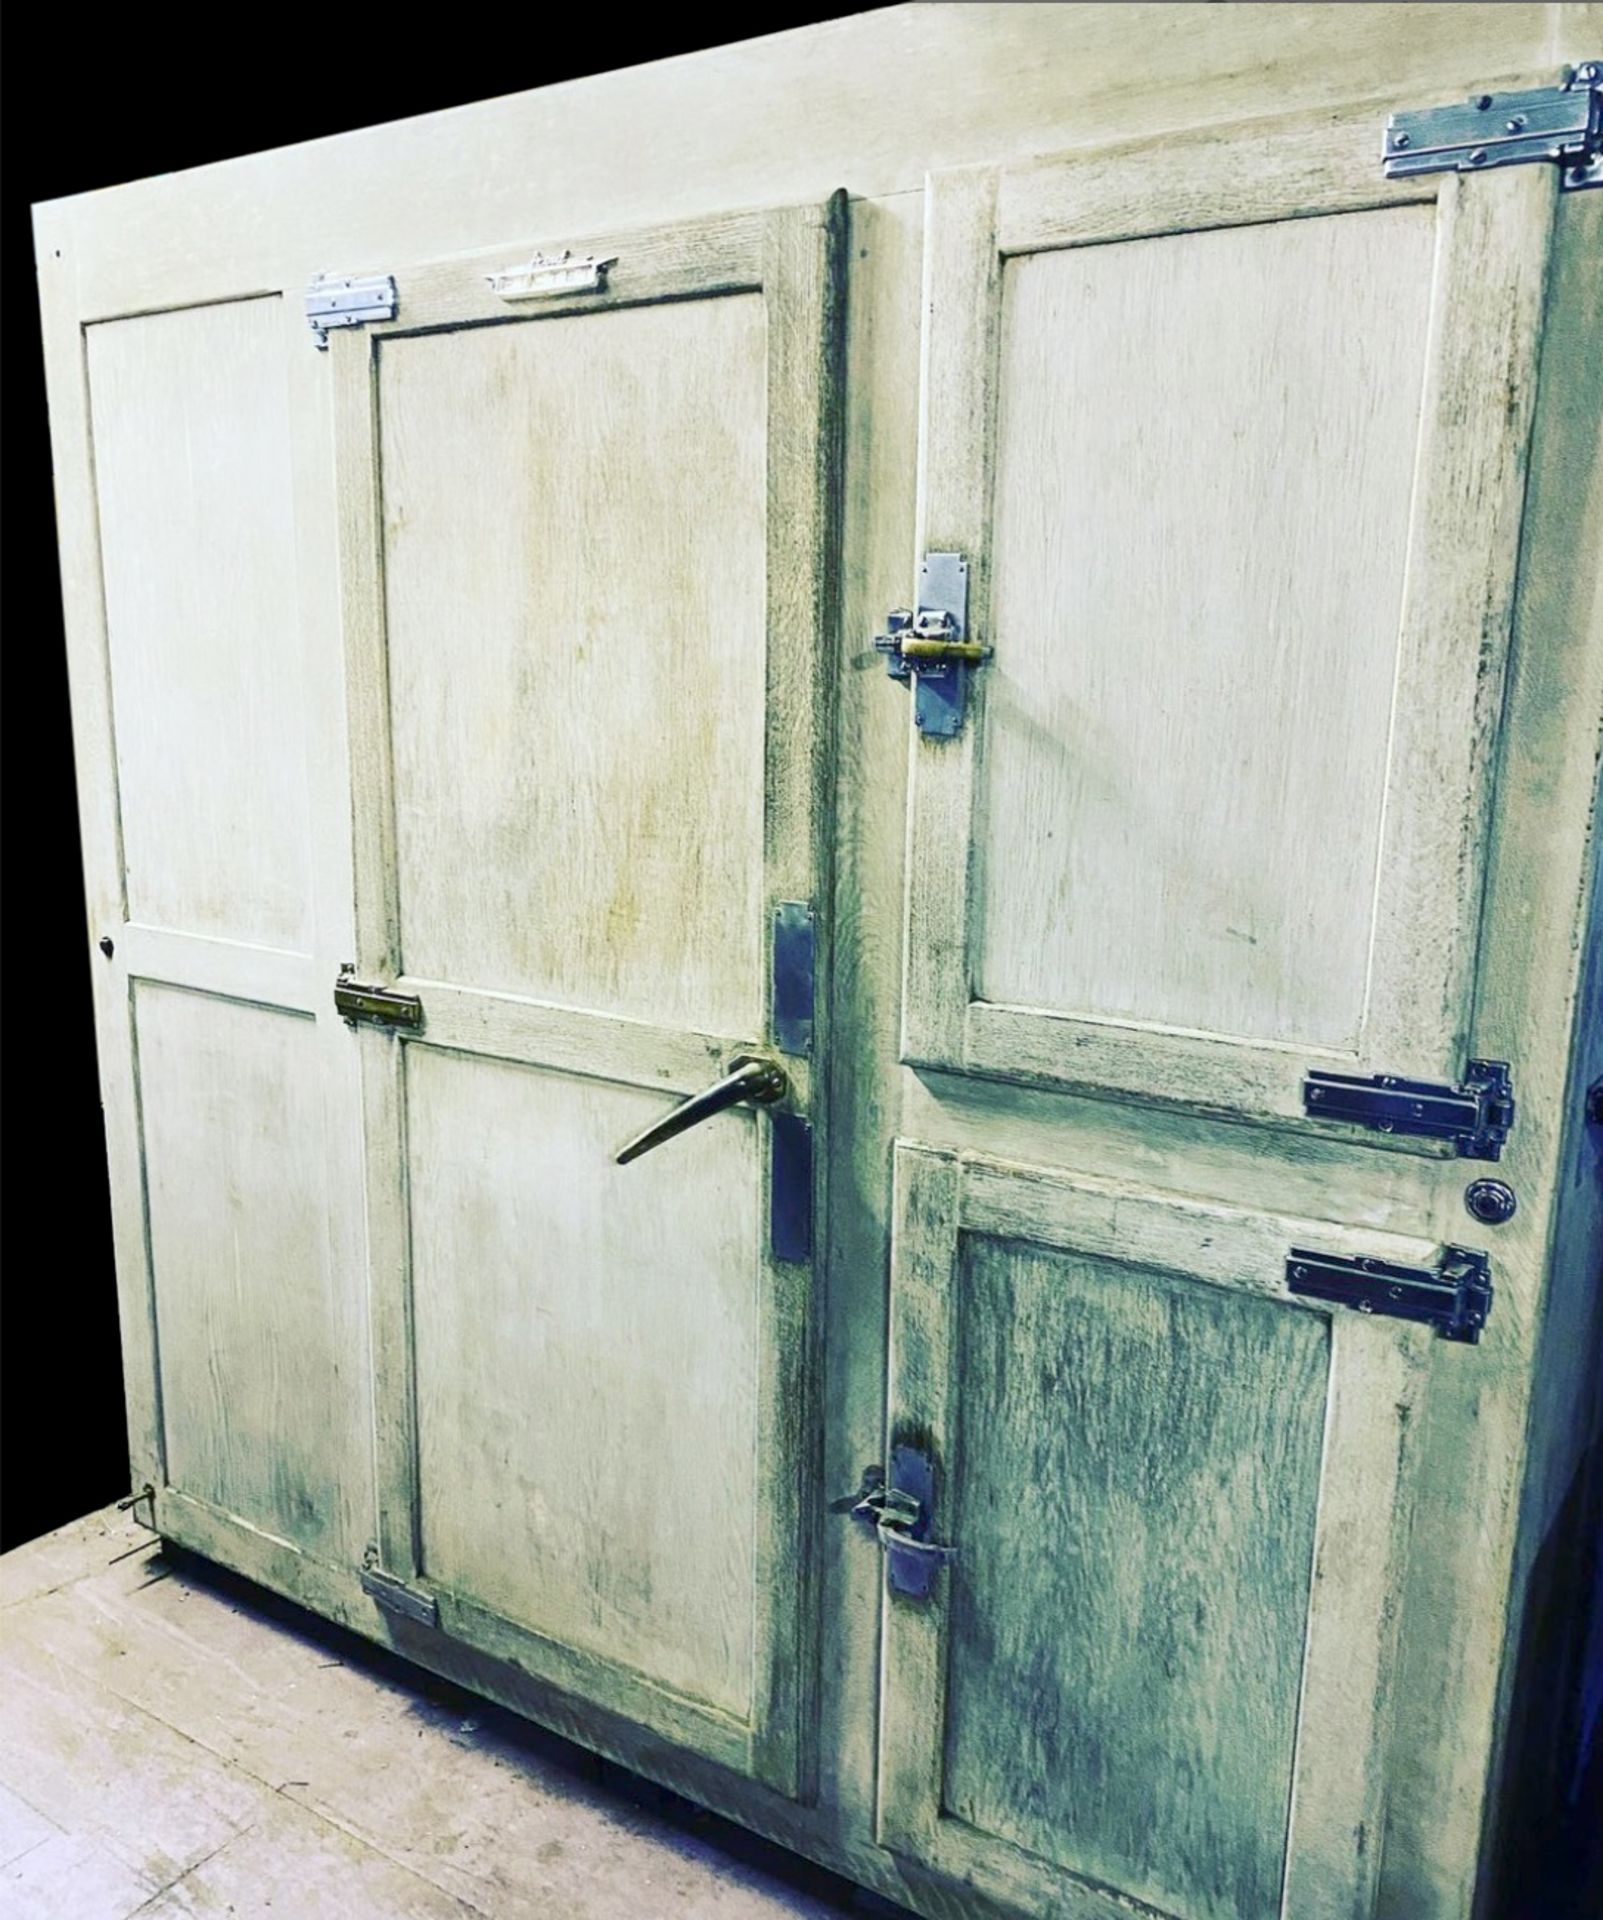 A LATE 19TH / EARLY 20TH CENTURY WALK-IN LARDER